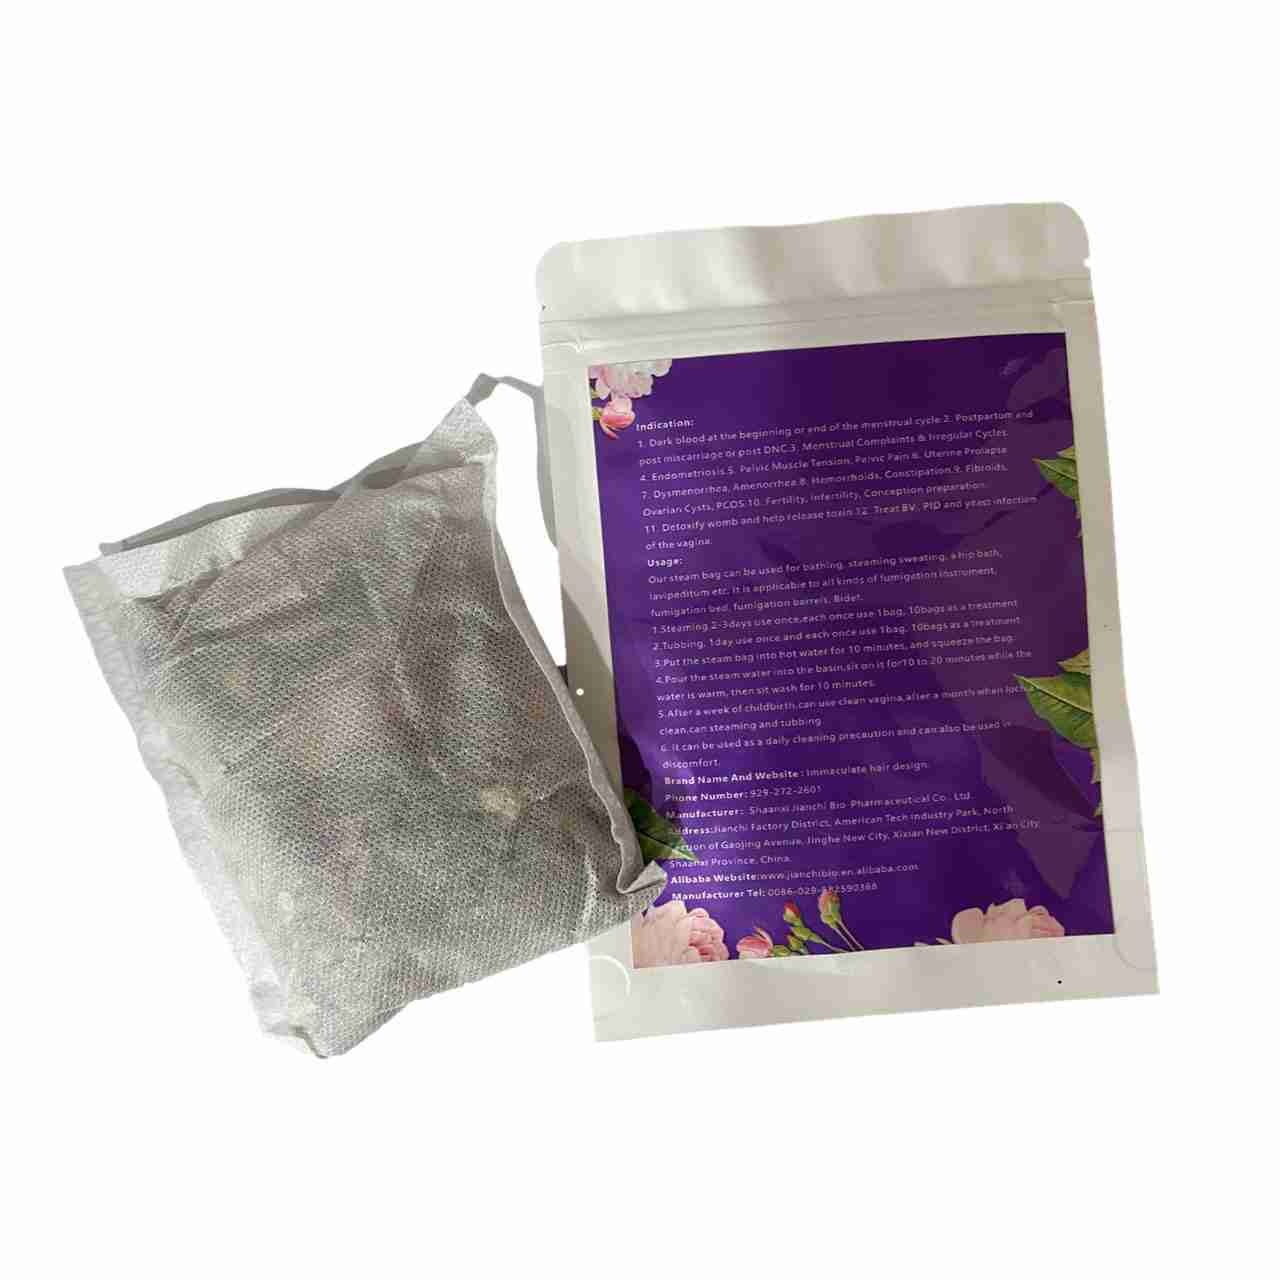 females-women-health-cleansing-steaming-vaginal with discount code